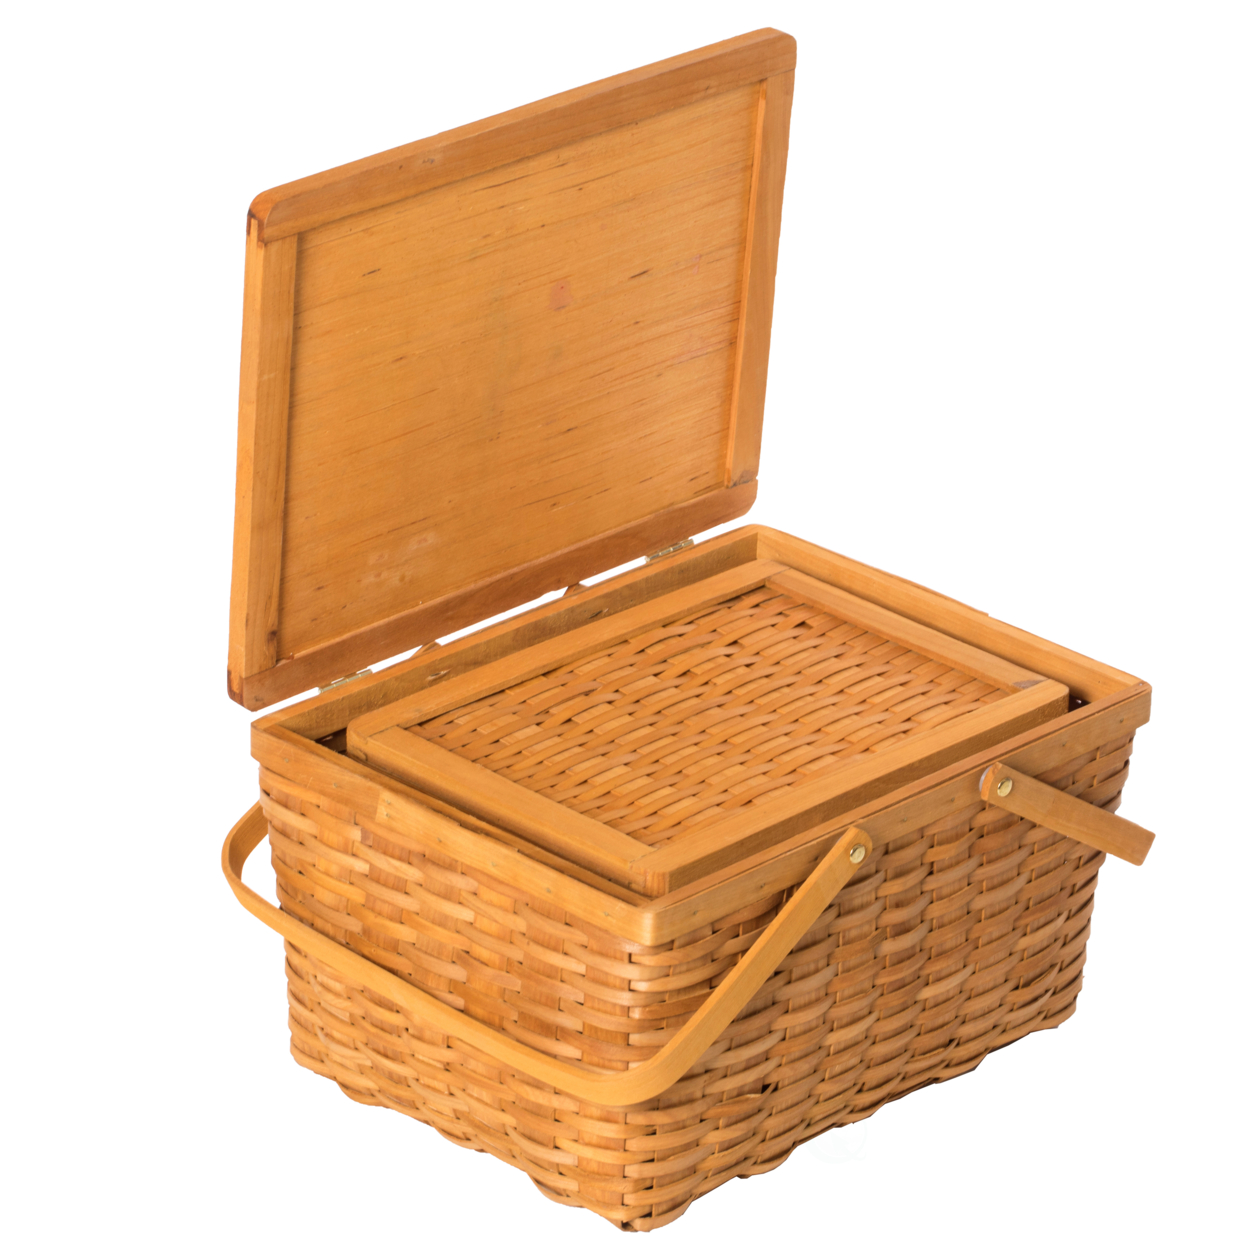 Woodchip Picnic Storage Basket With Cover And Movable Handles - Set Of 2